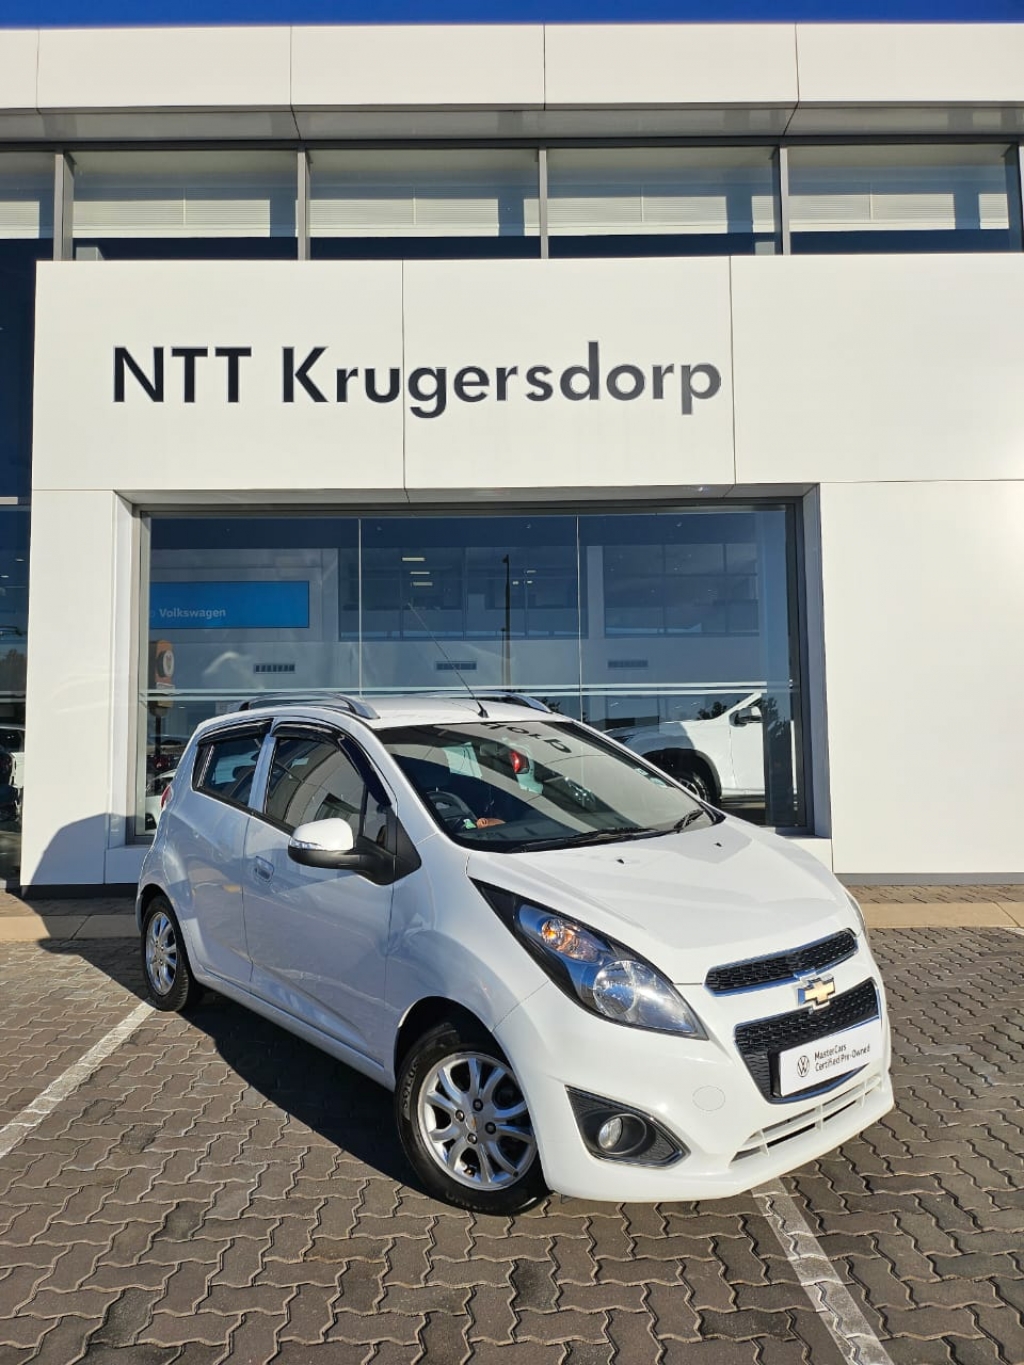 CHEVROLET SPARK 1.2 LS 5Dr for Sale in South Africa